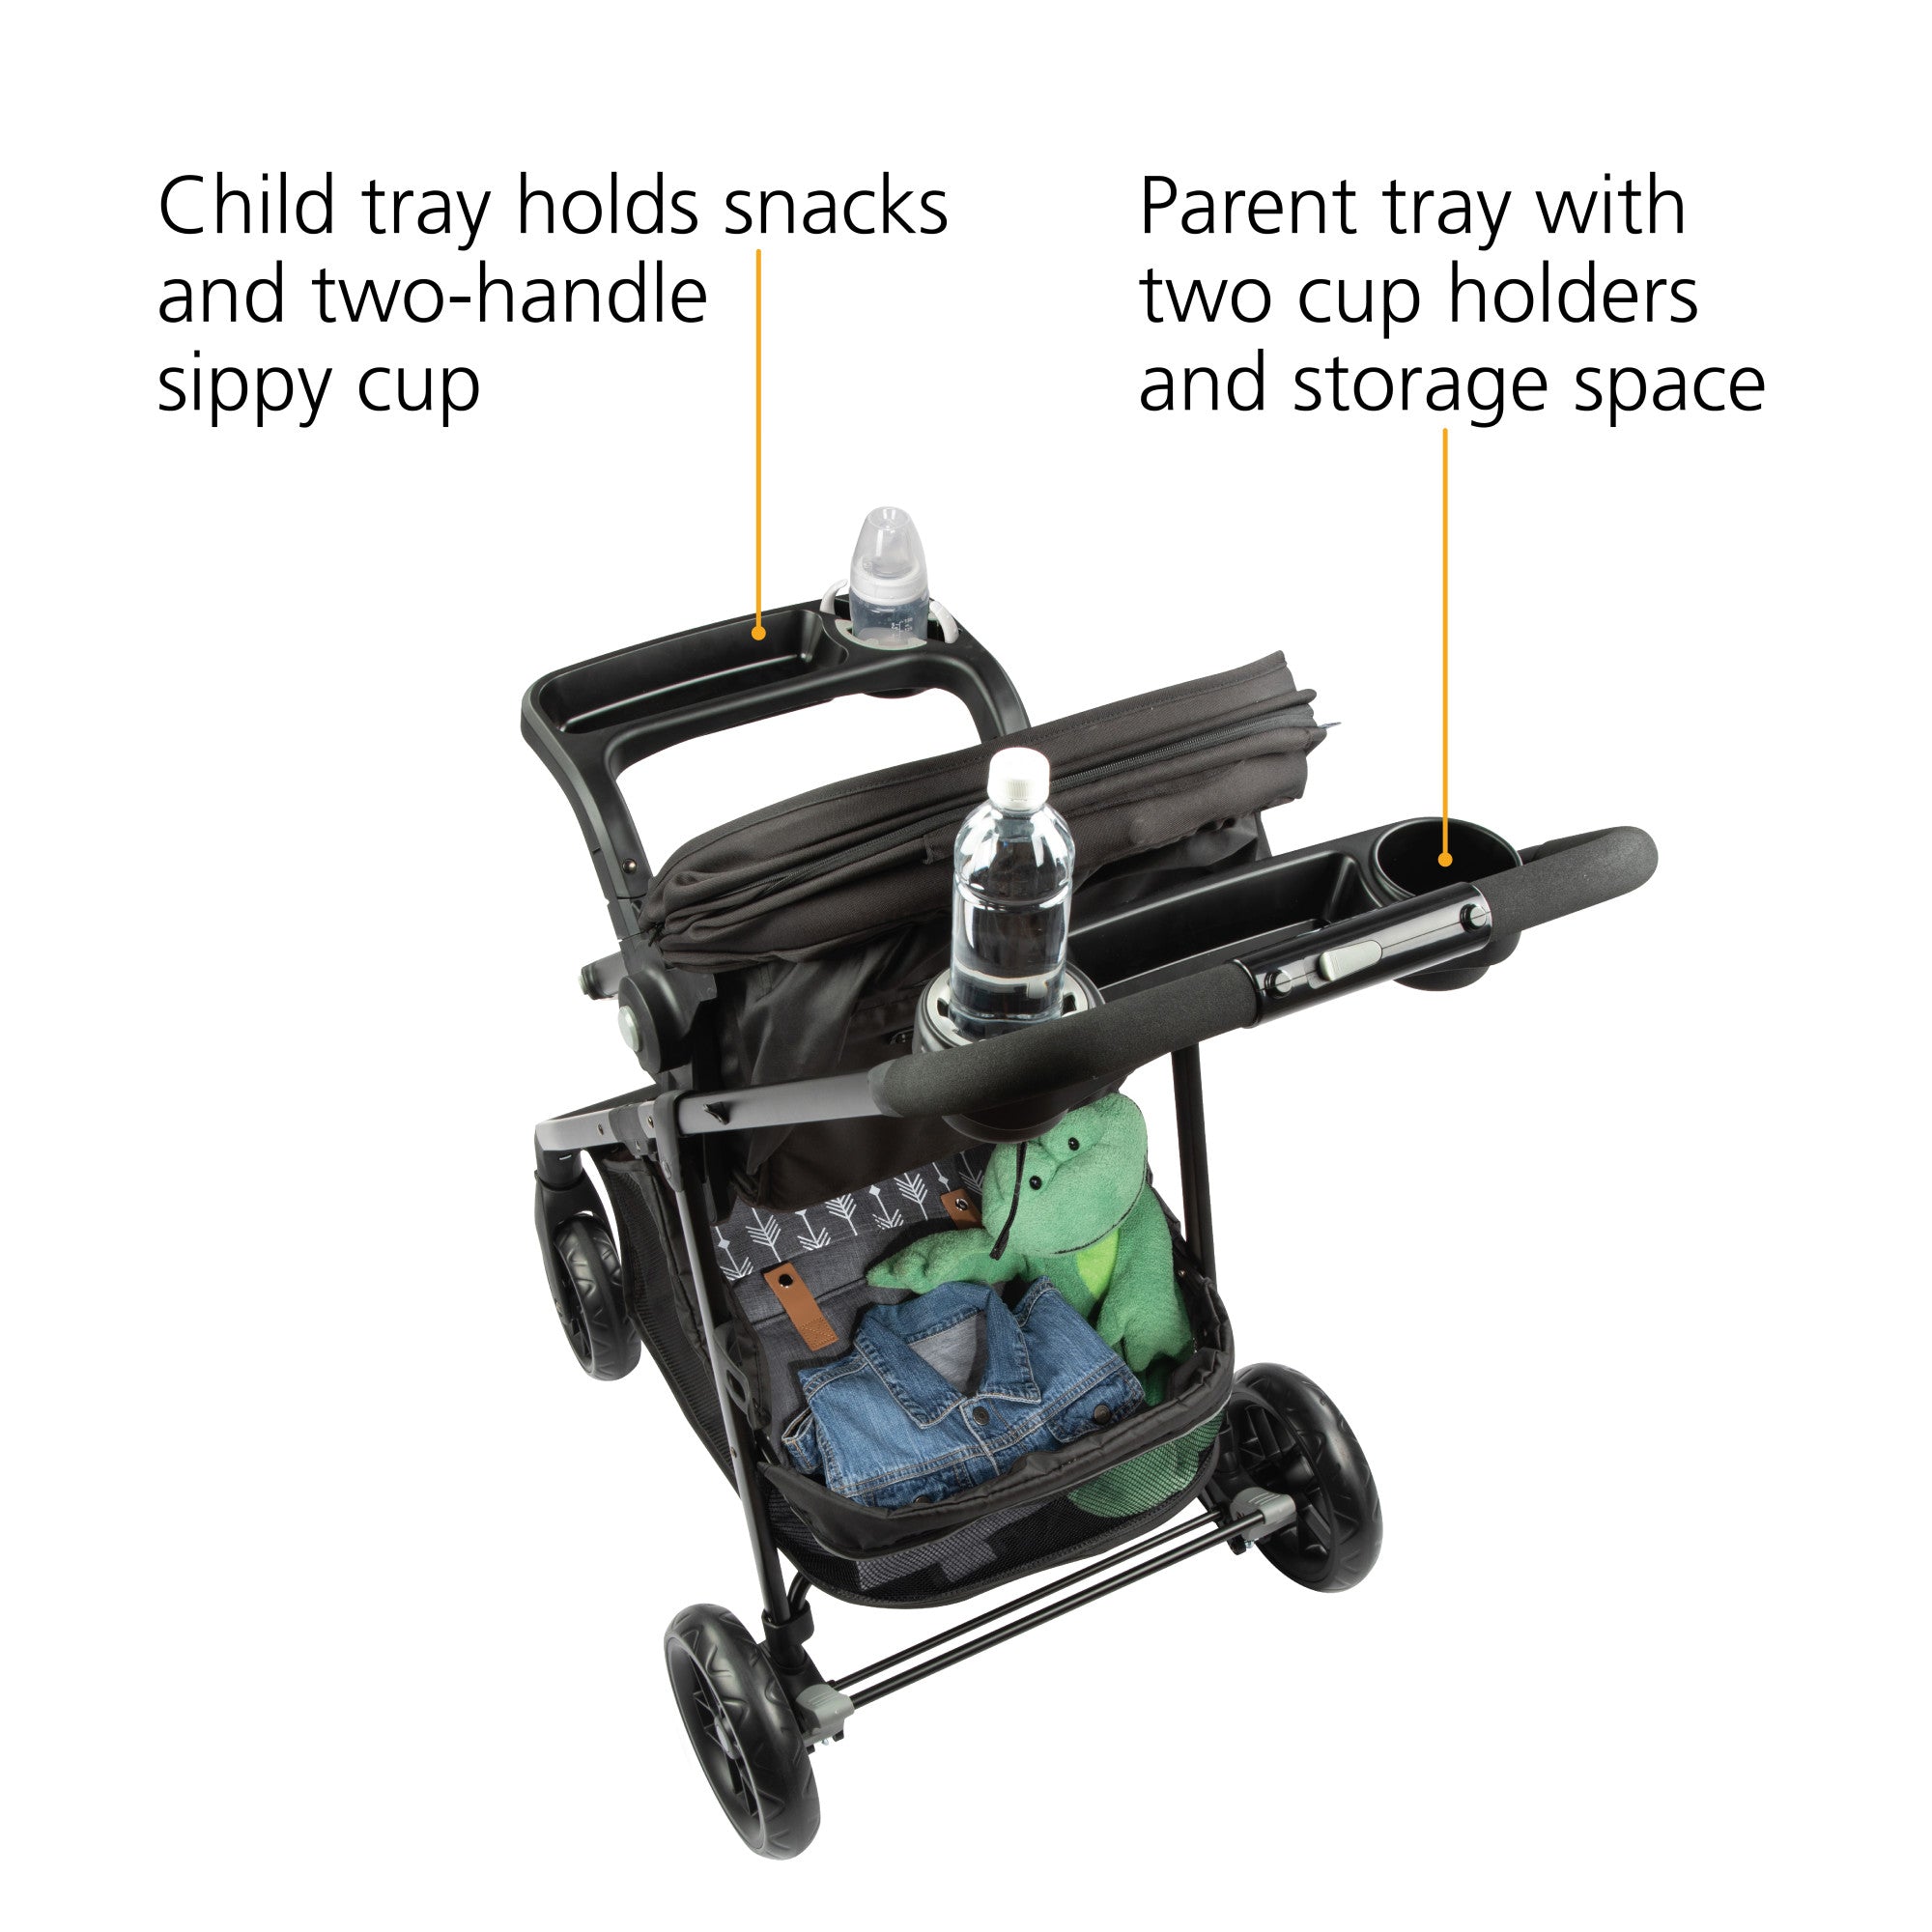 Grow and Go™ Flex 8-in-1 Travel System - child tray holds snacks and two-handle sippy cup, parent tray with two cup holders and storage space